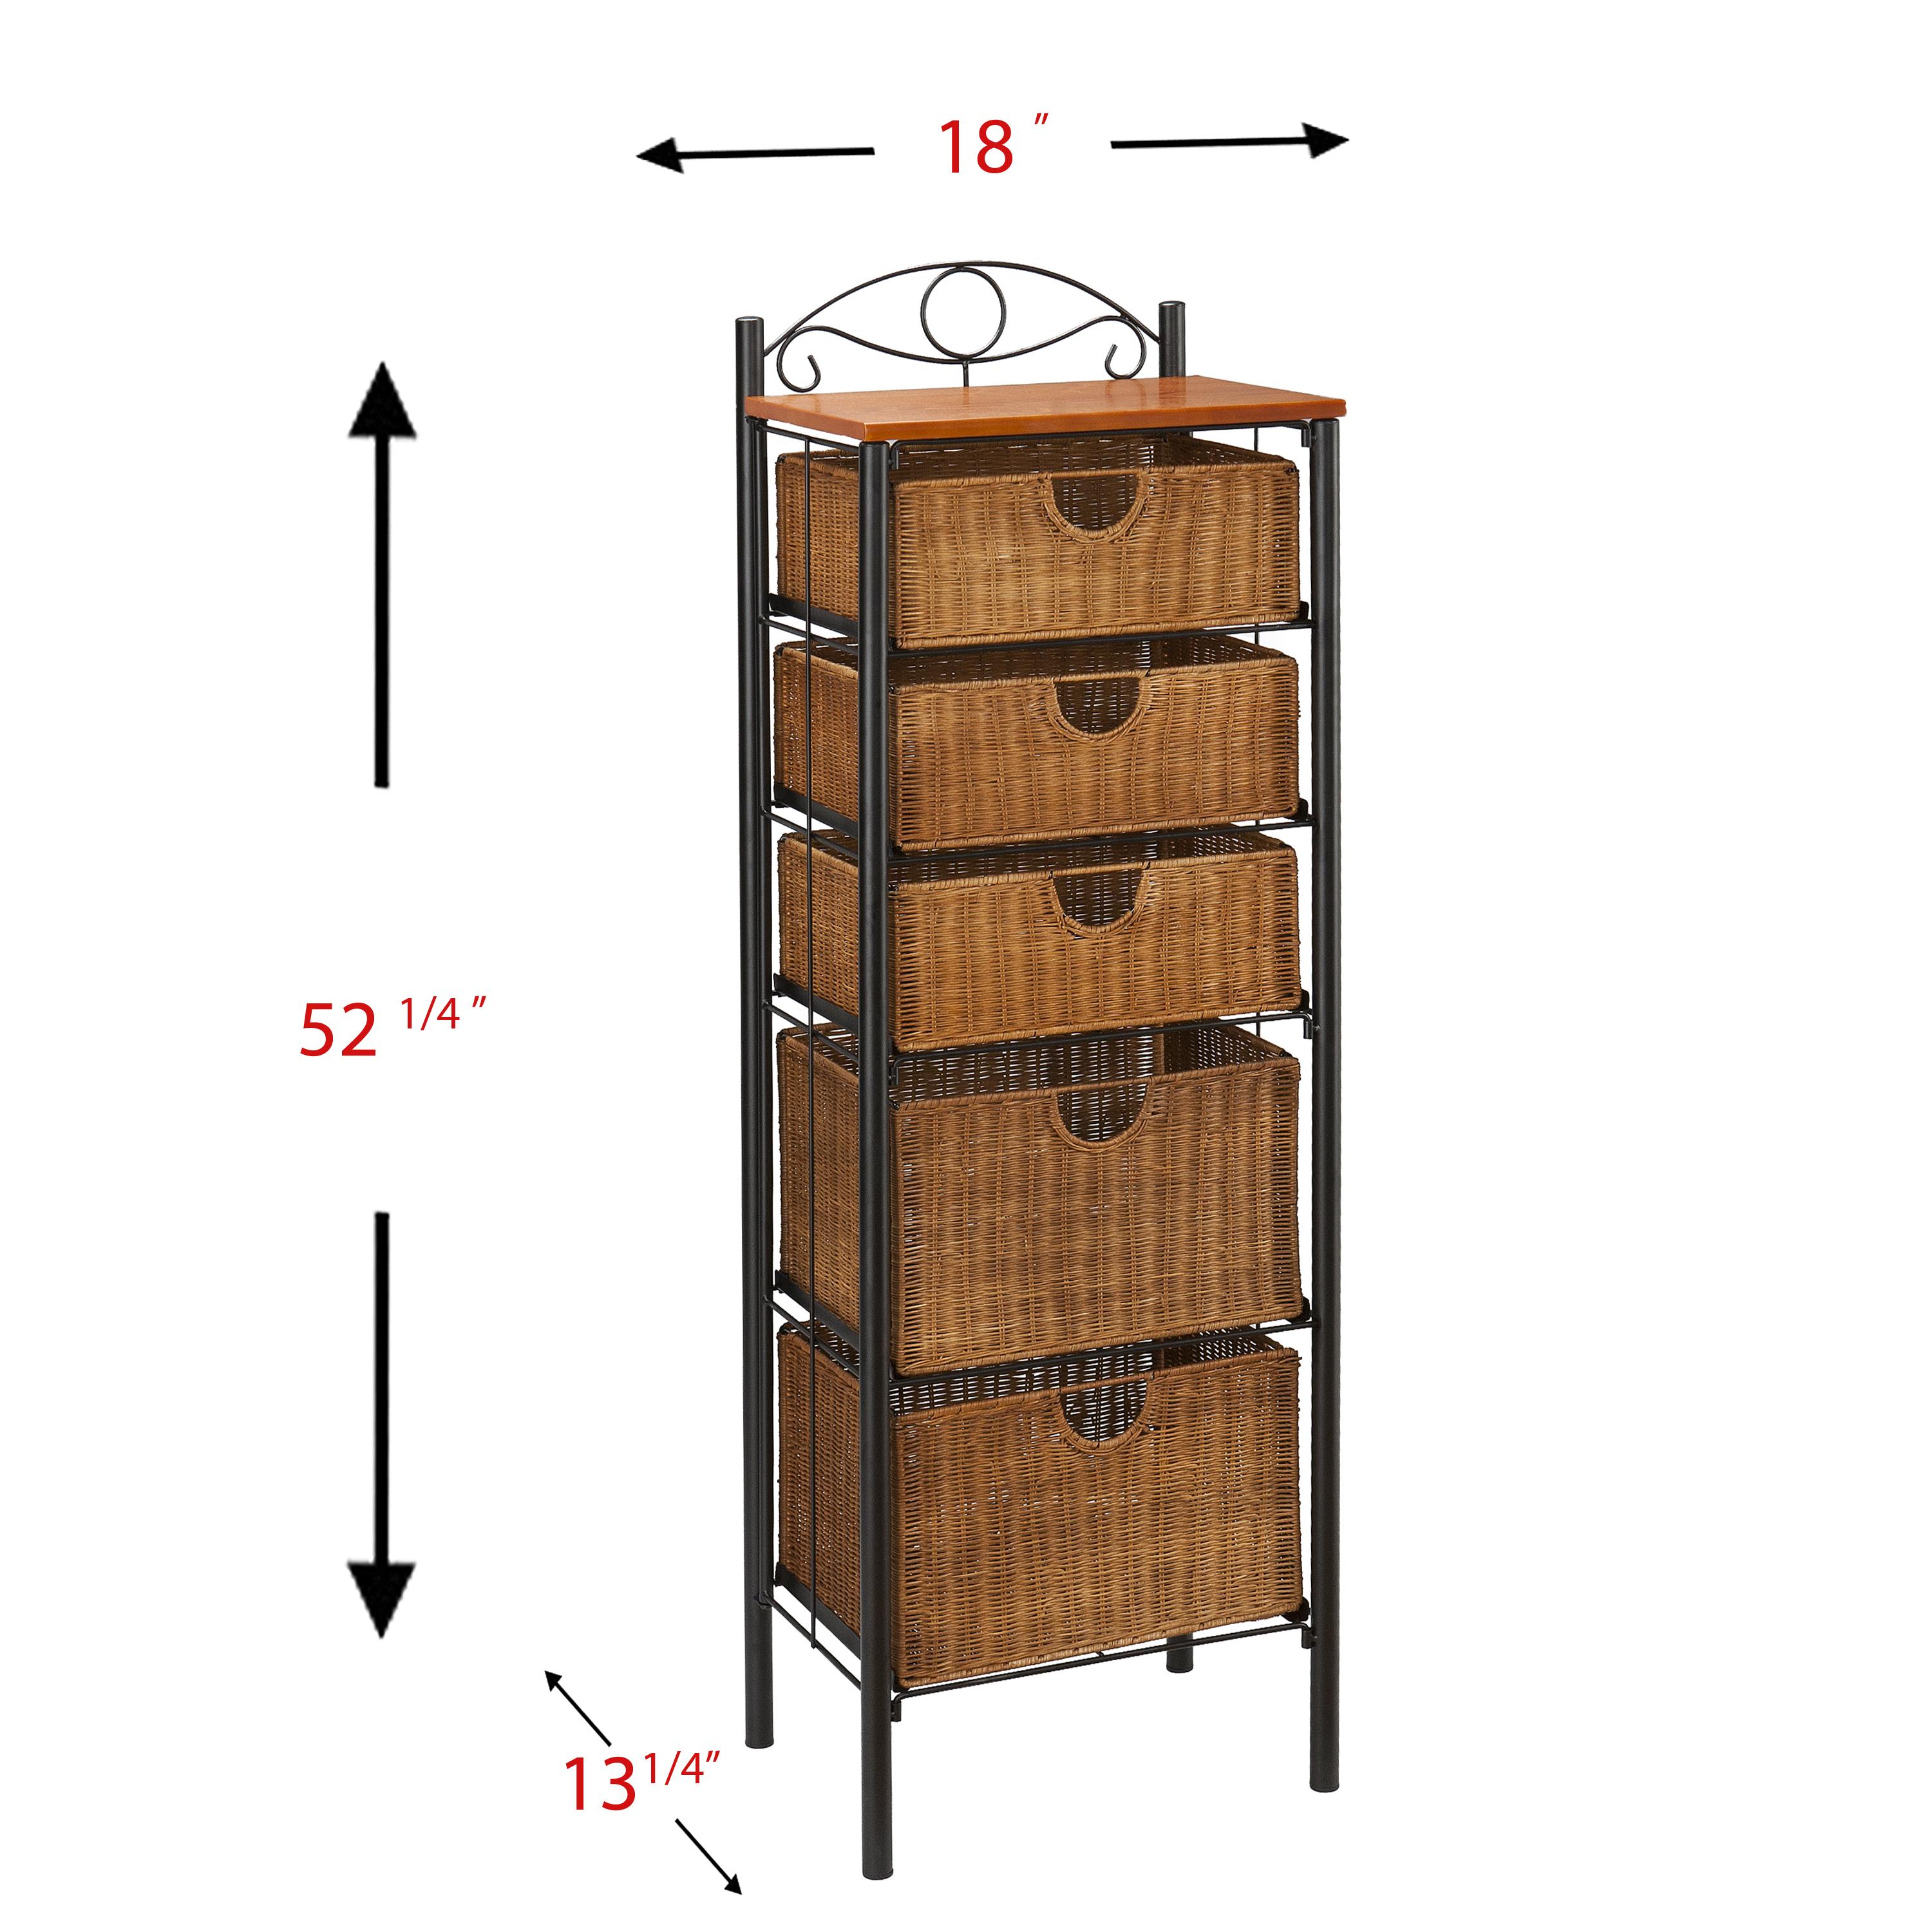 Southern Enterprises Iron and Wicker Five-Drawer Unit - image 2 of 8